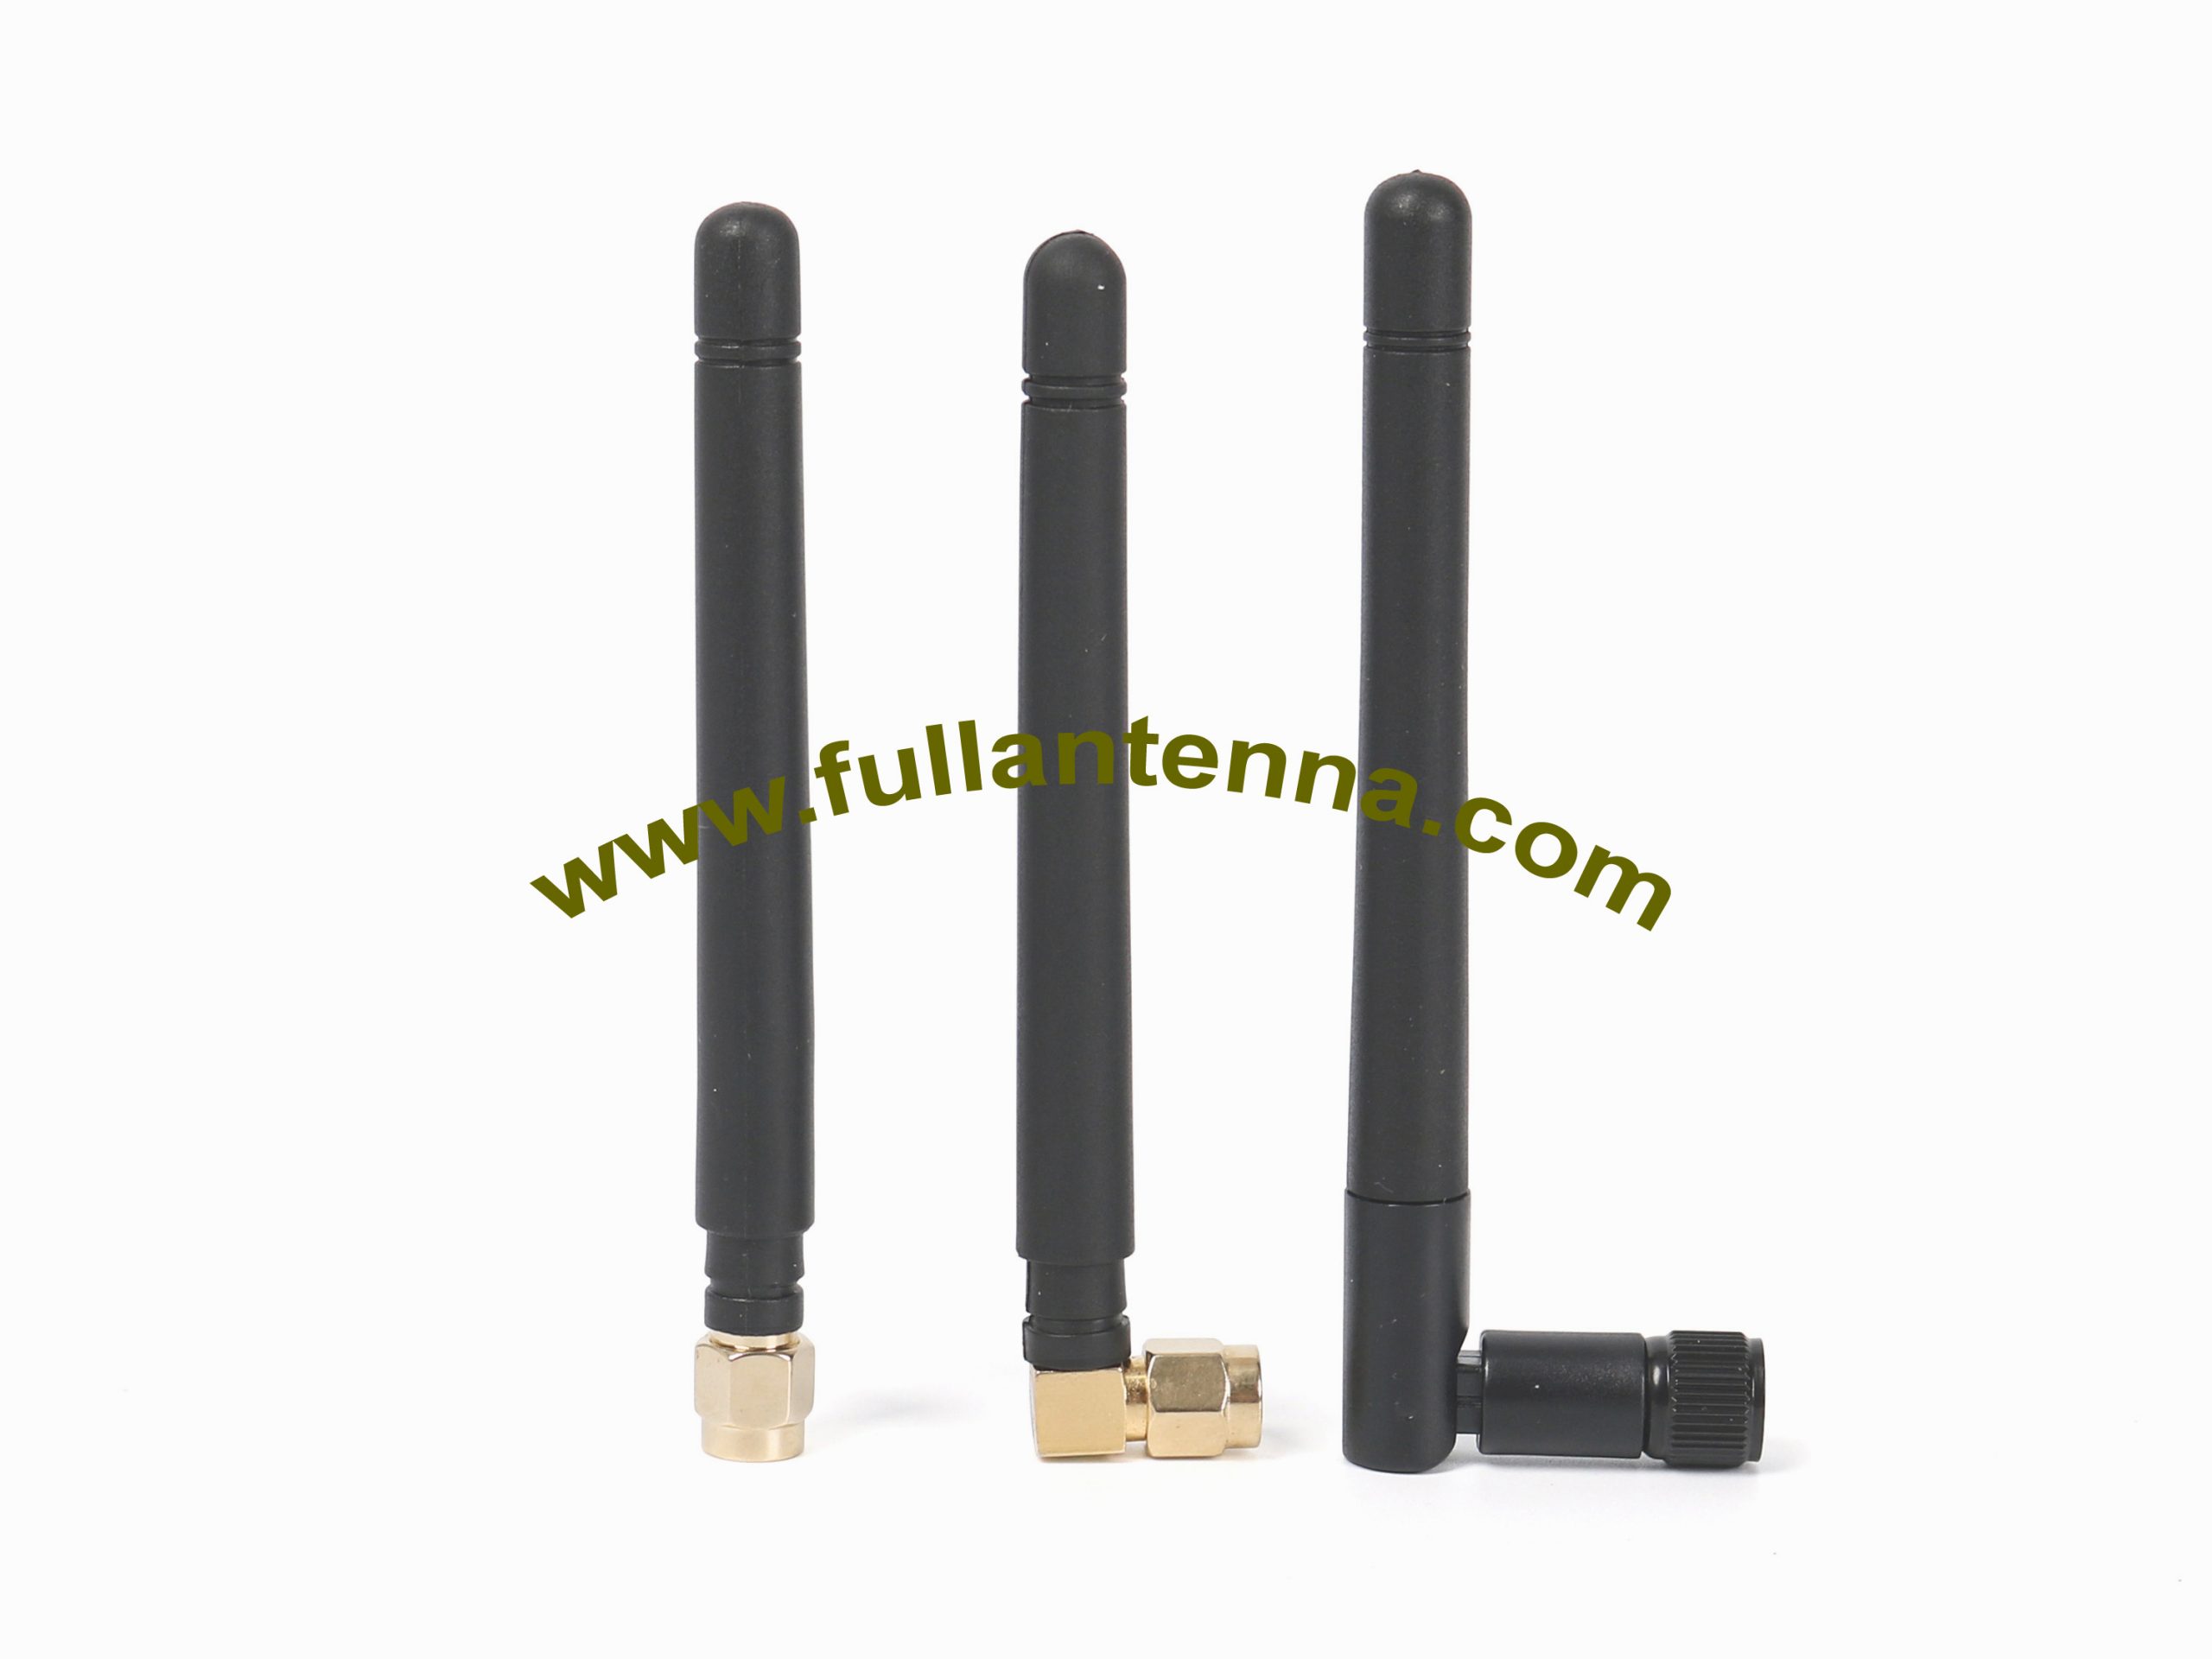 P/N:FA433.02,433Mhz Antenna,rubber antenna with SMA straight right angle or rotation male